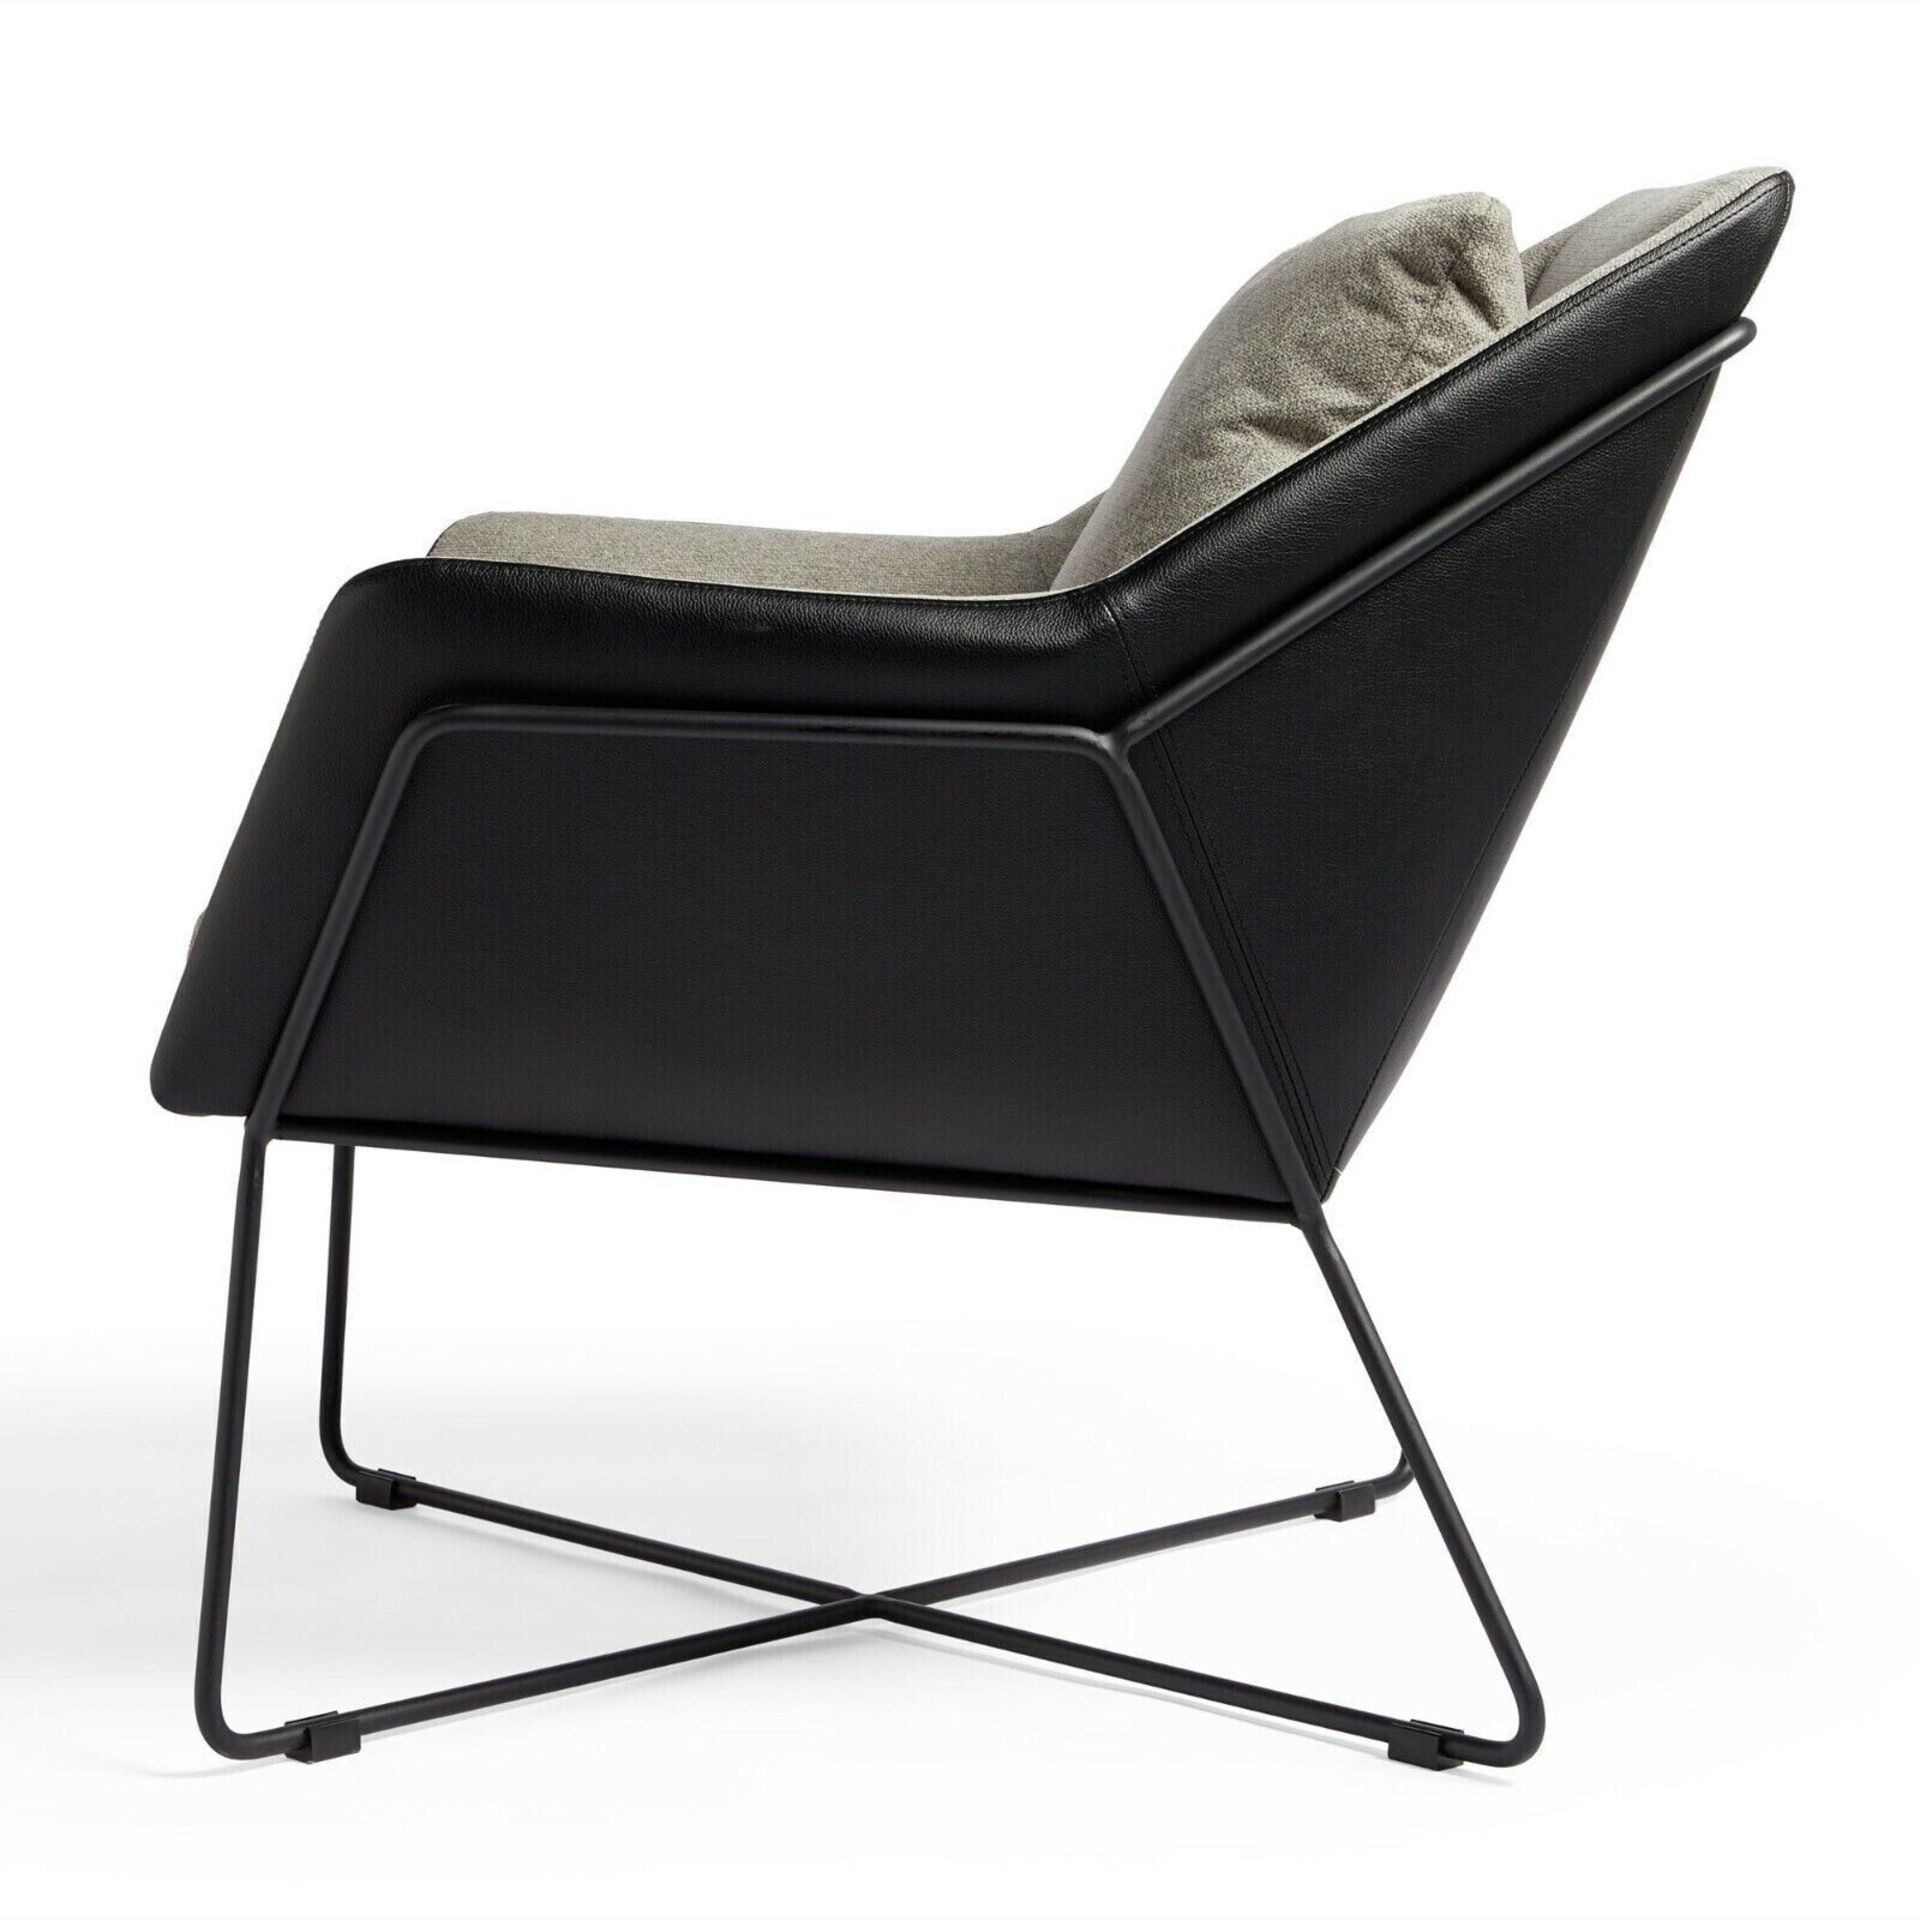 NEW & BOXED Grey & Black Framed Armchair. RRP £214. (181). MODERN STYLING – Finished off with a - Image 2 of 3